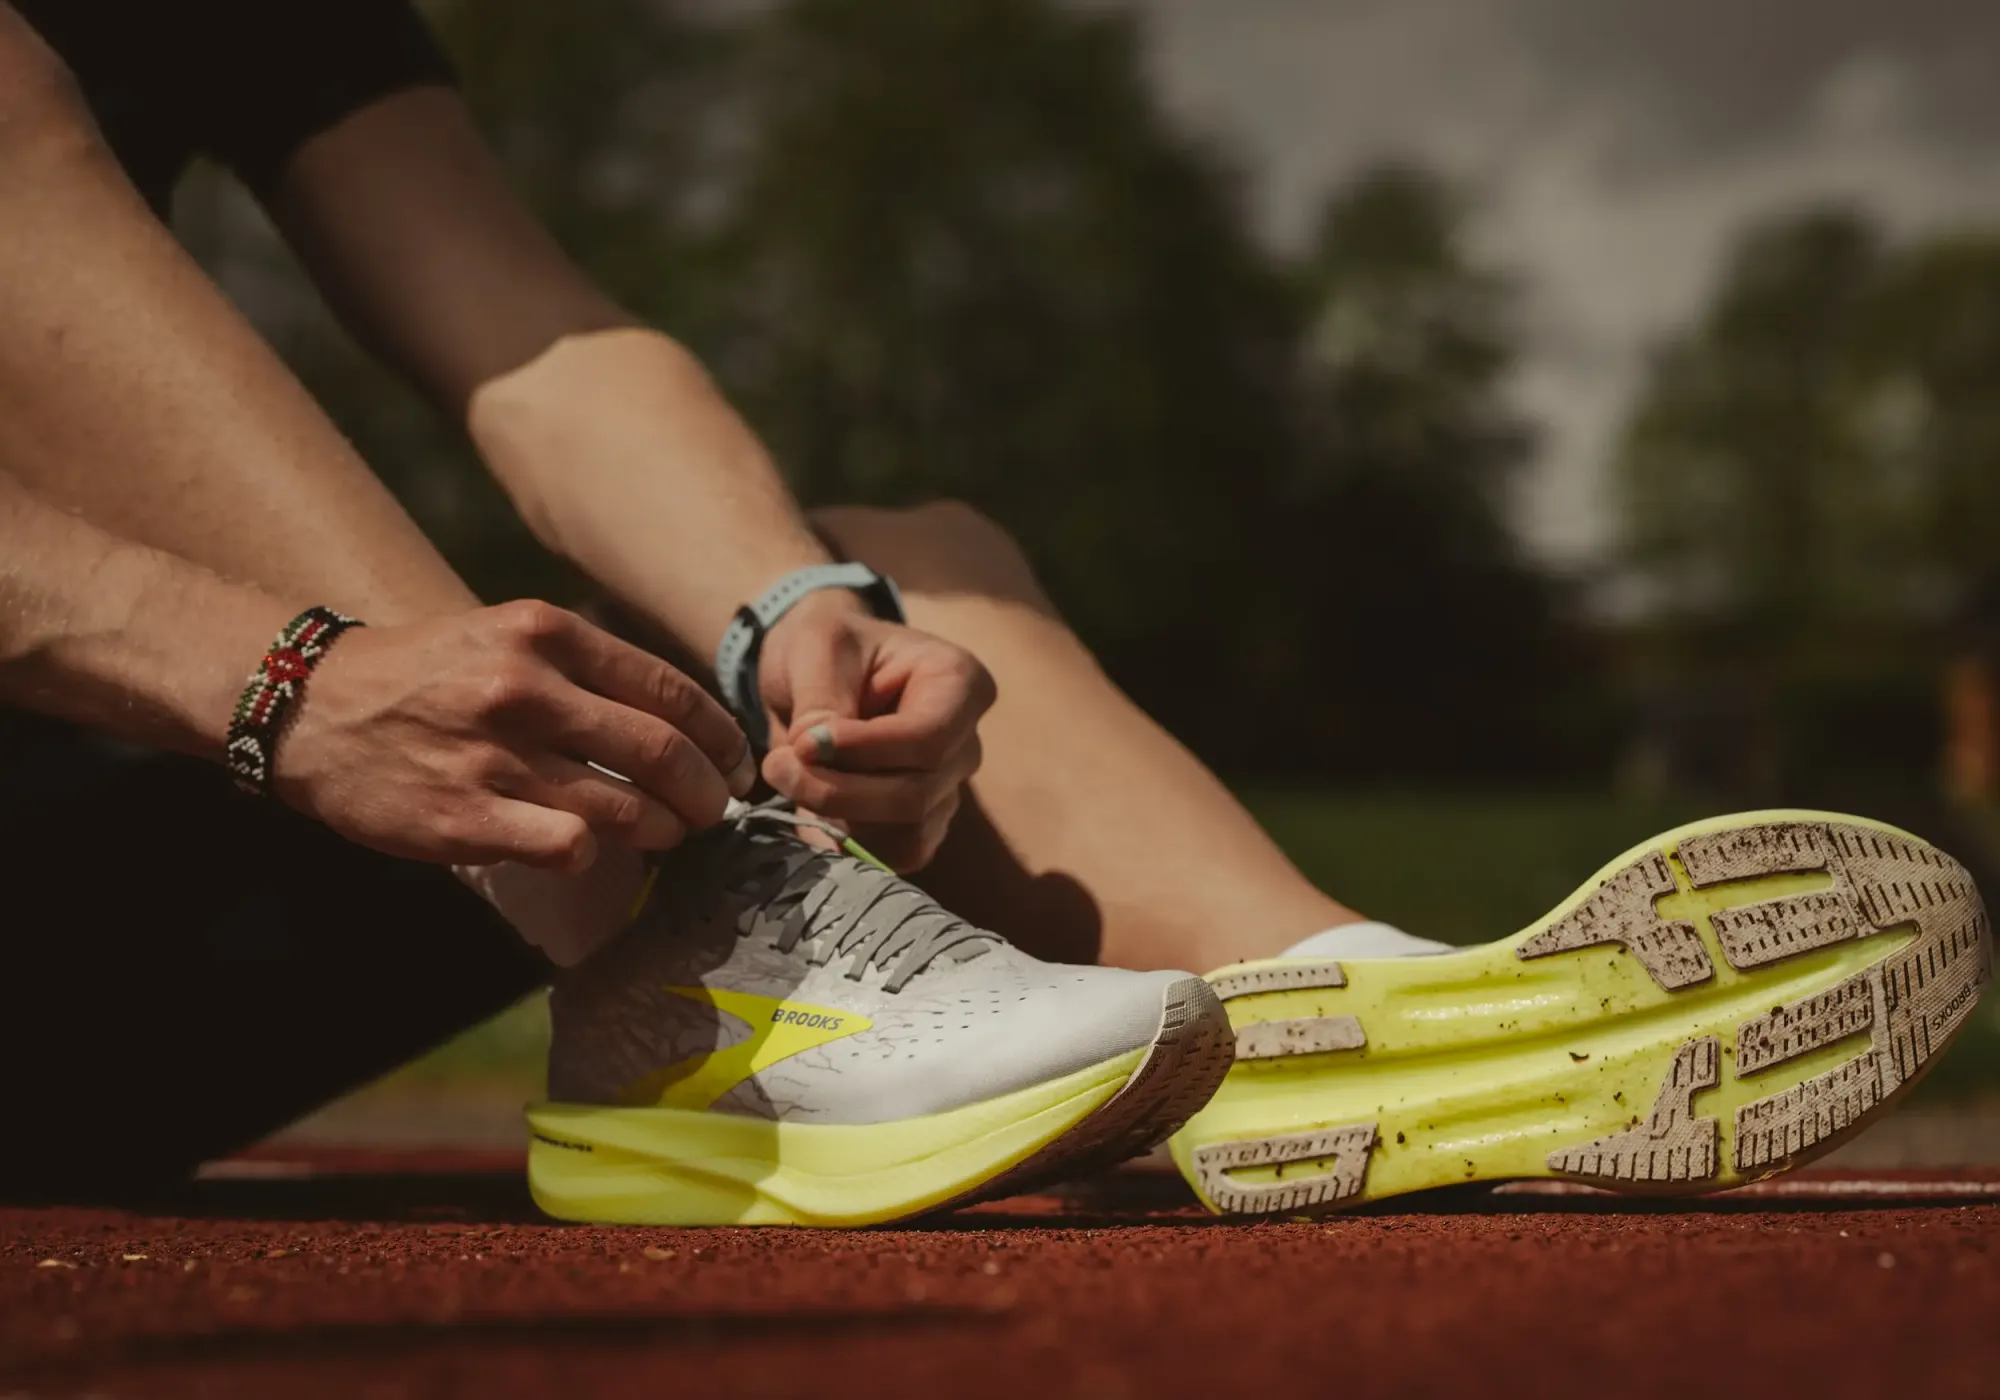 A beginner runner ties the laces of the Brooks running shoes.